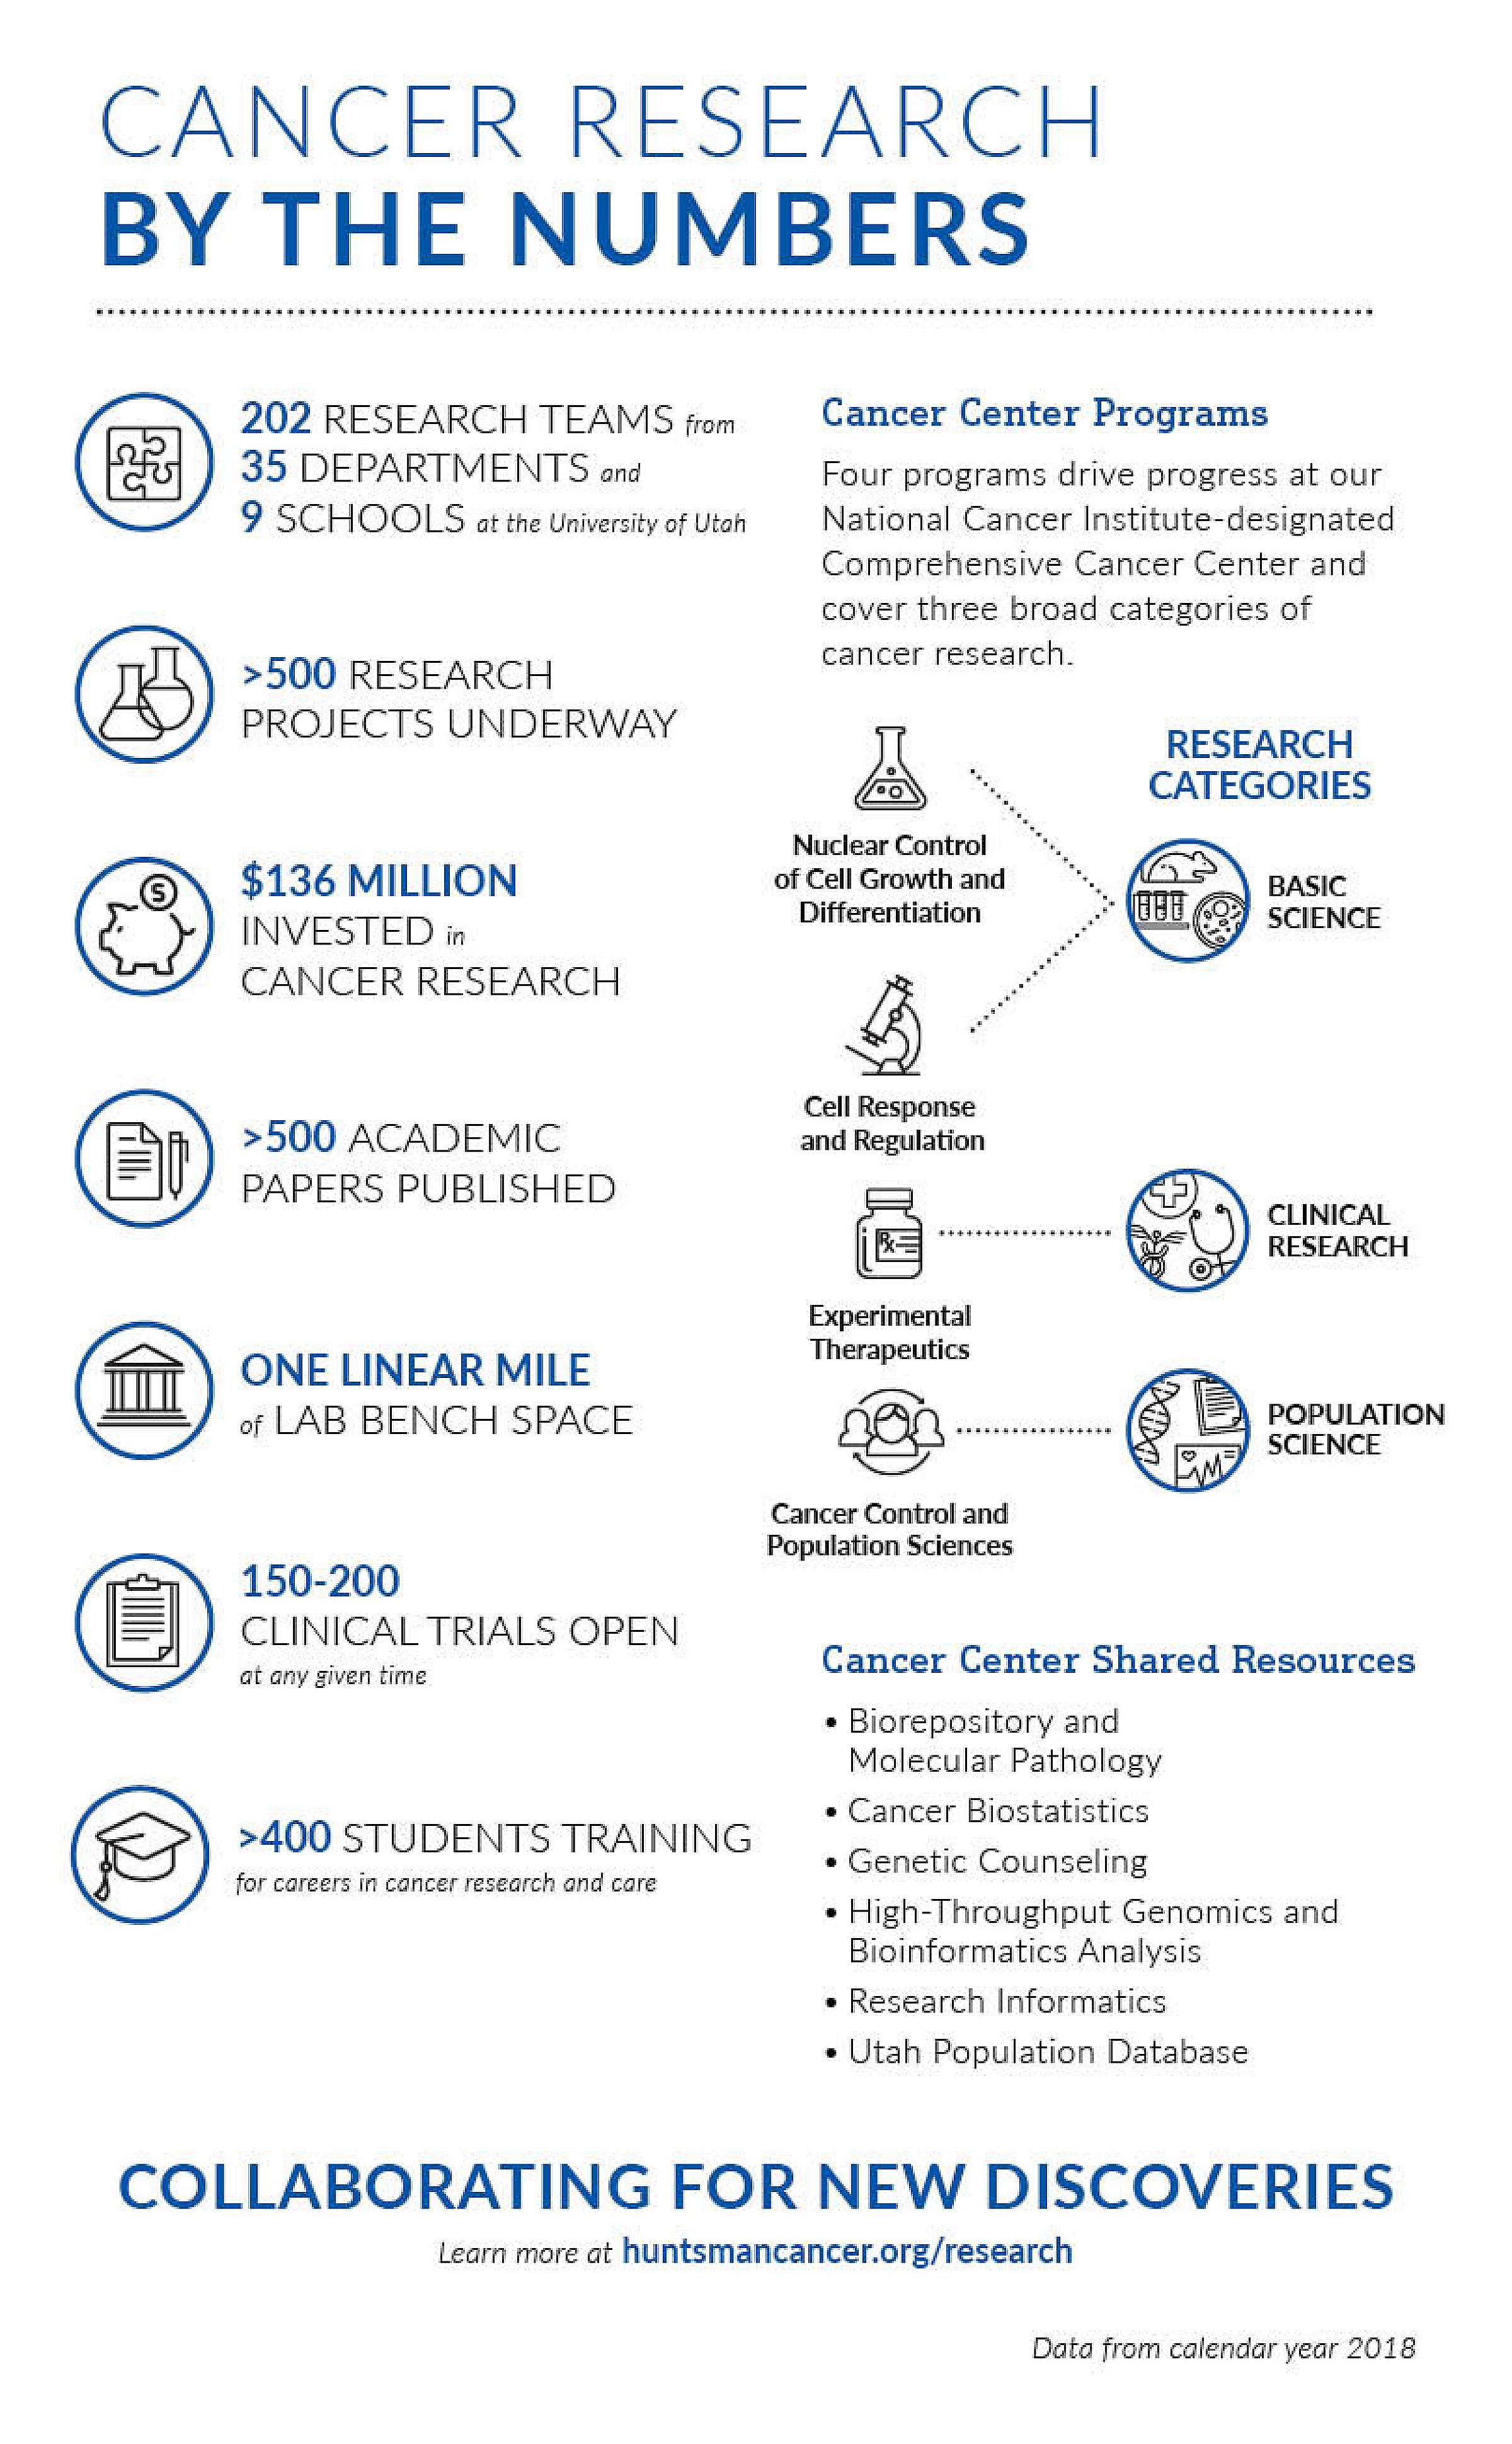 Cancer research statistics for 2018